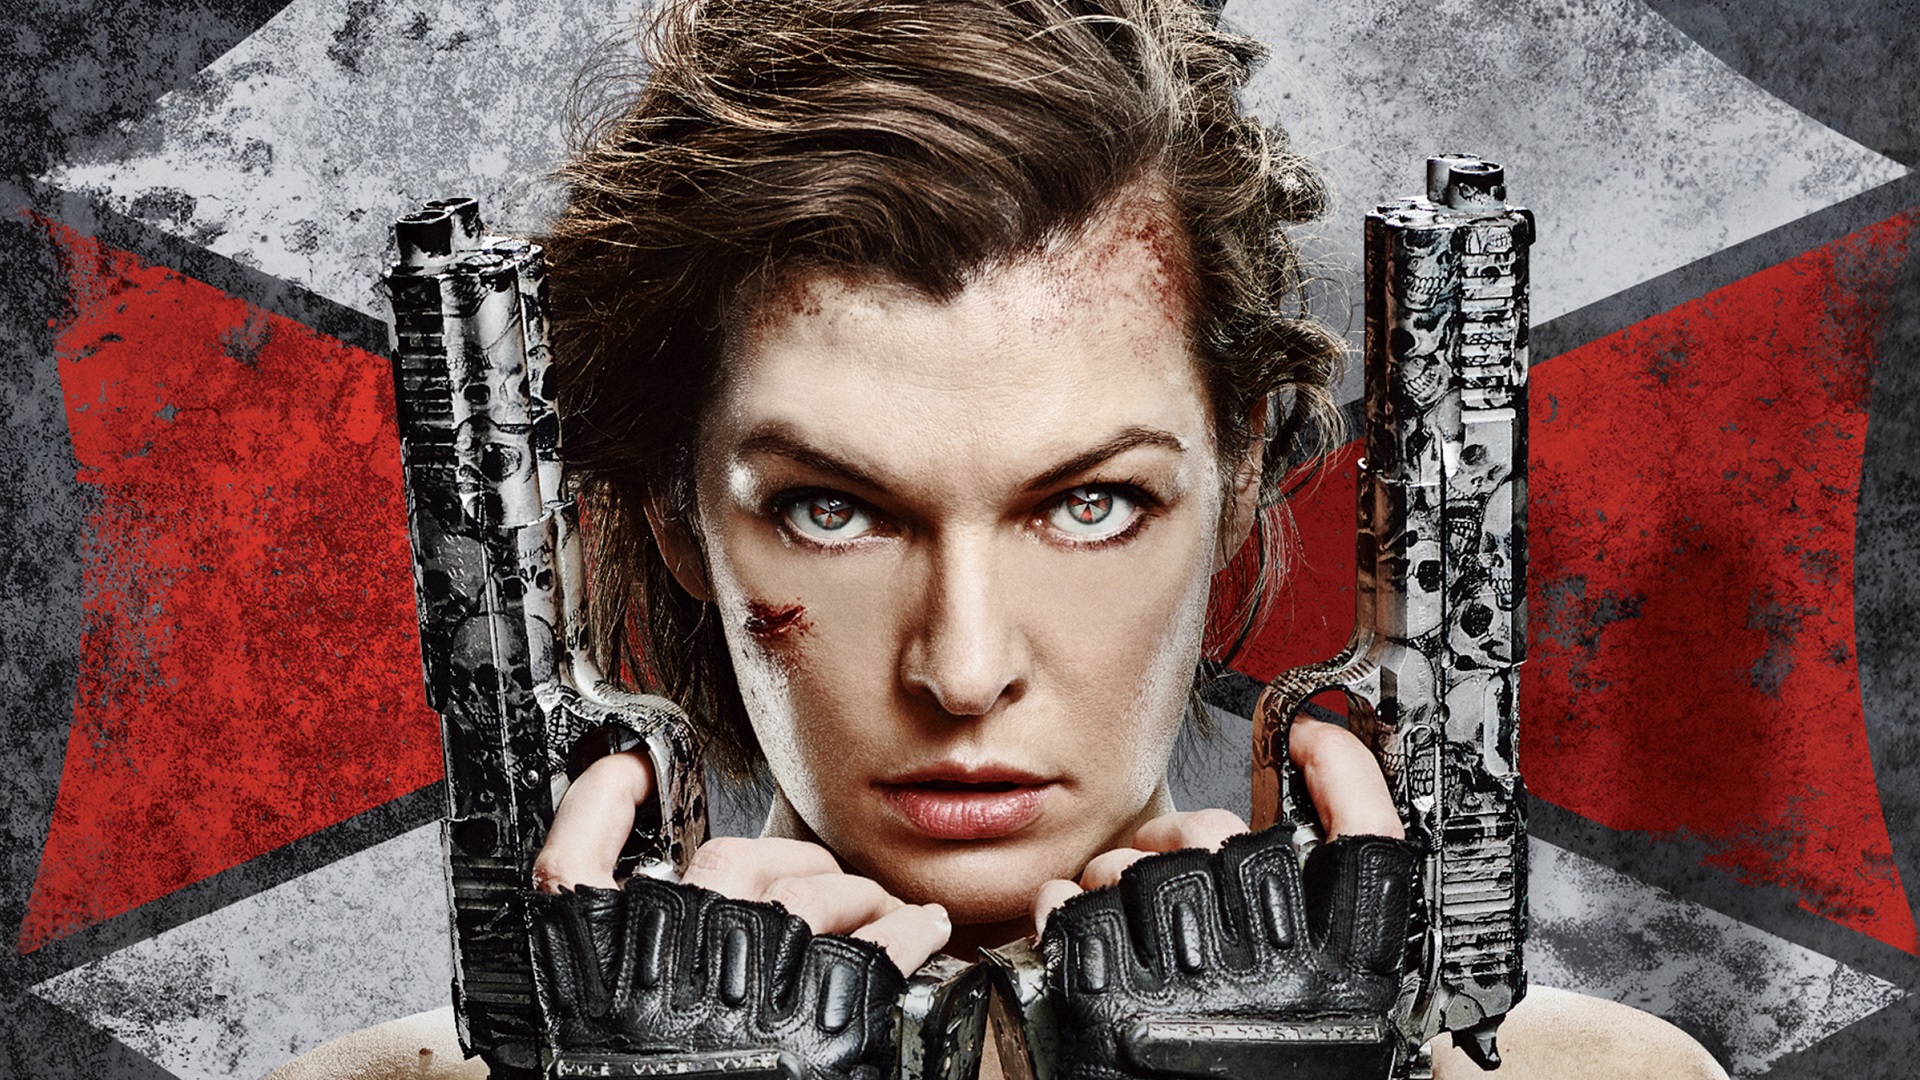 Milla-Jovovich-Resident-Evil-The-Final-Chapter-2017_1920x1080